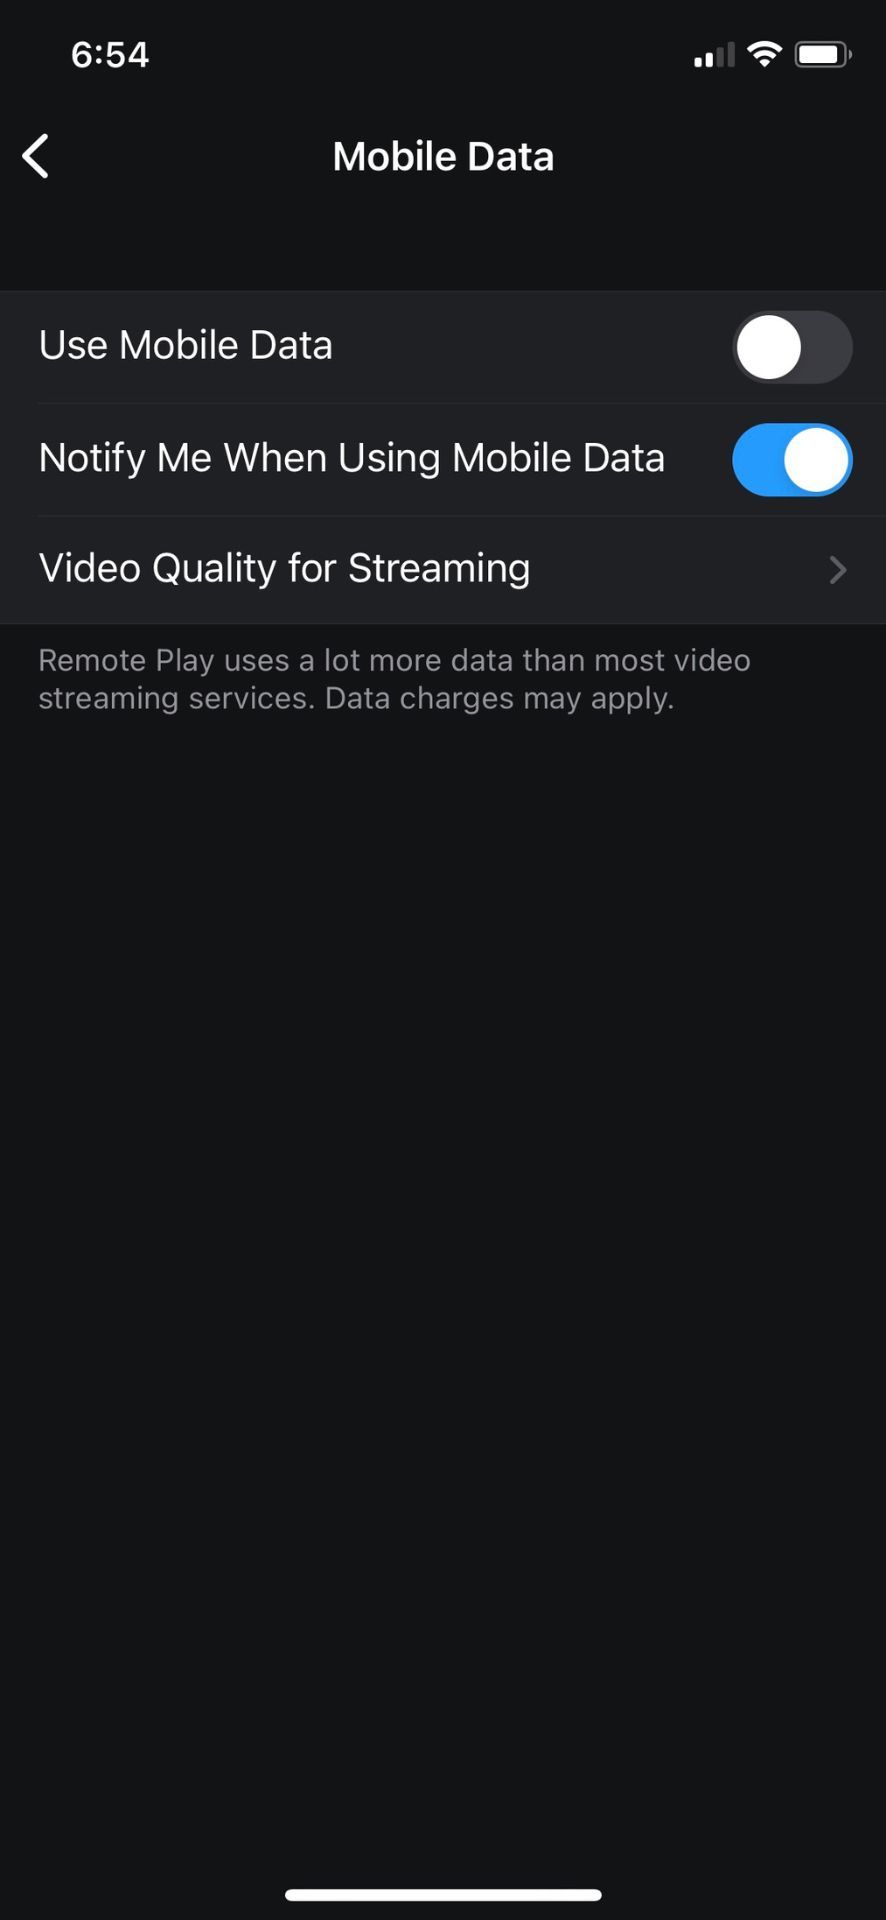 Setting up ps remote play on mobile device notify me when using mobile data